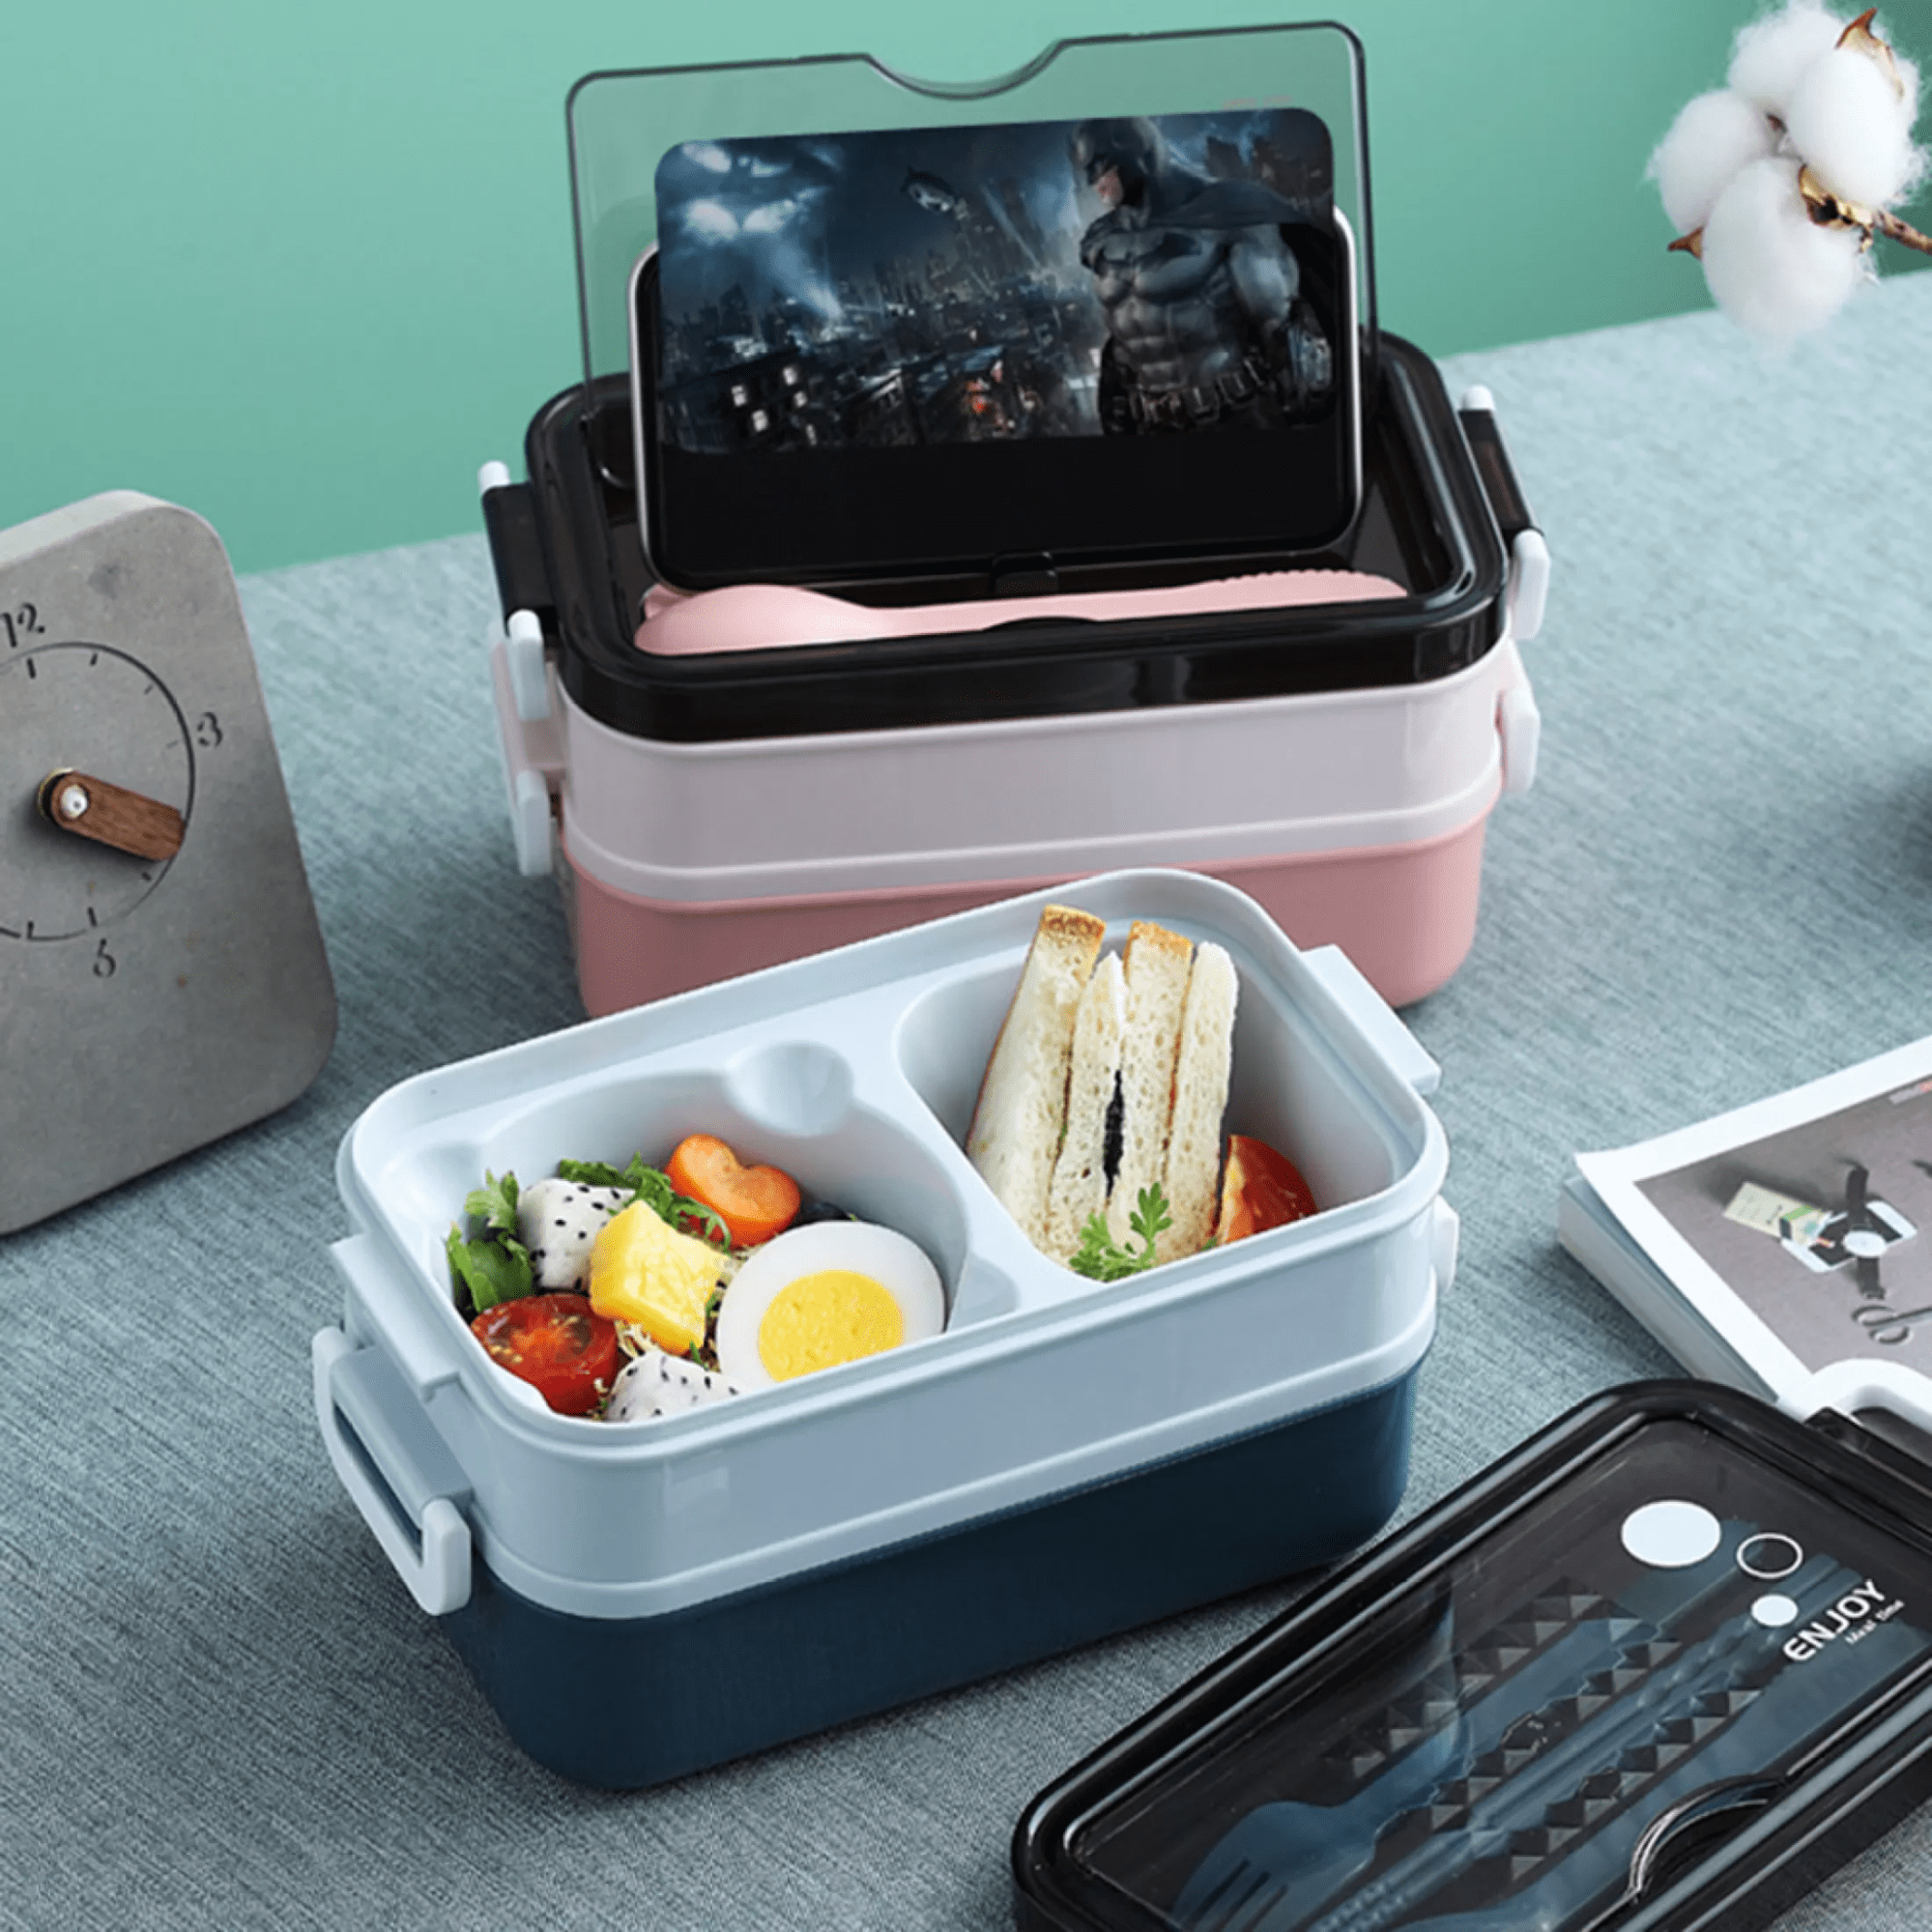 best and worst secret santa gifts - microwaveable lunch box